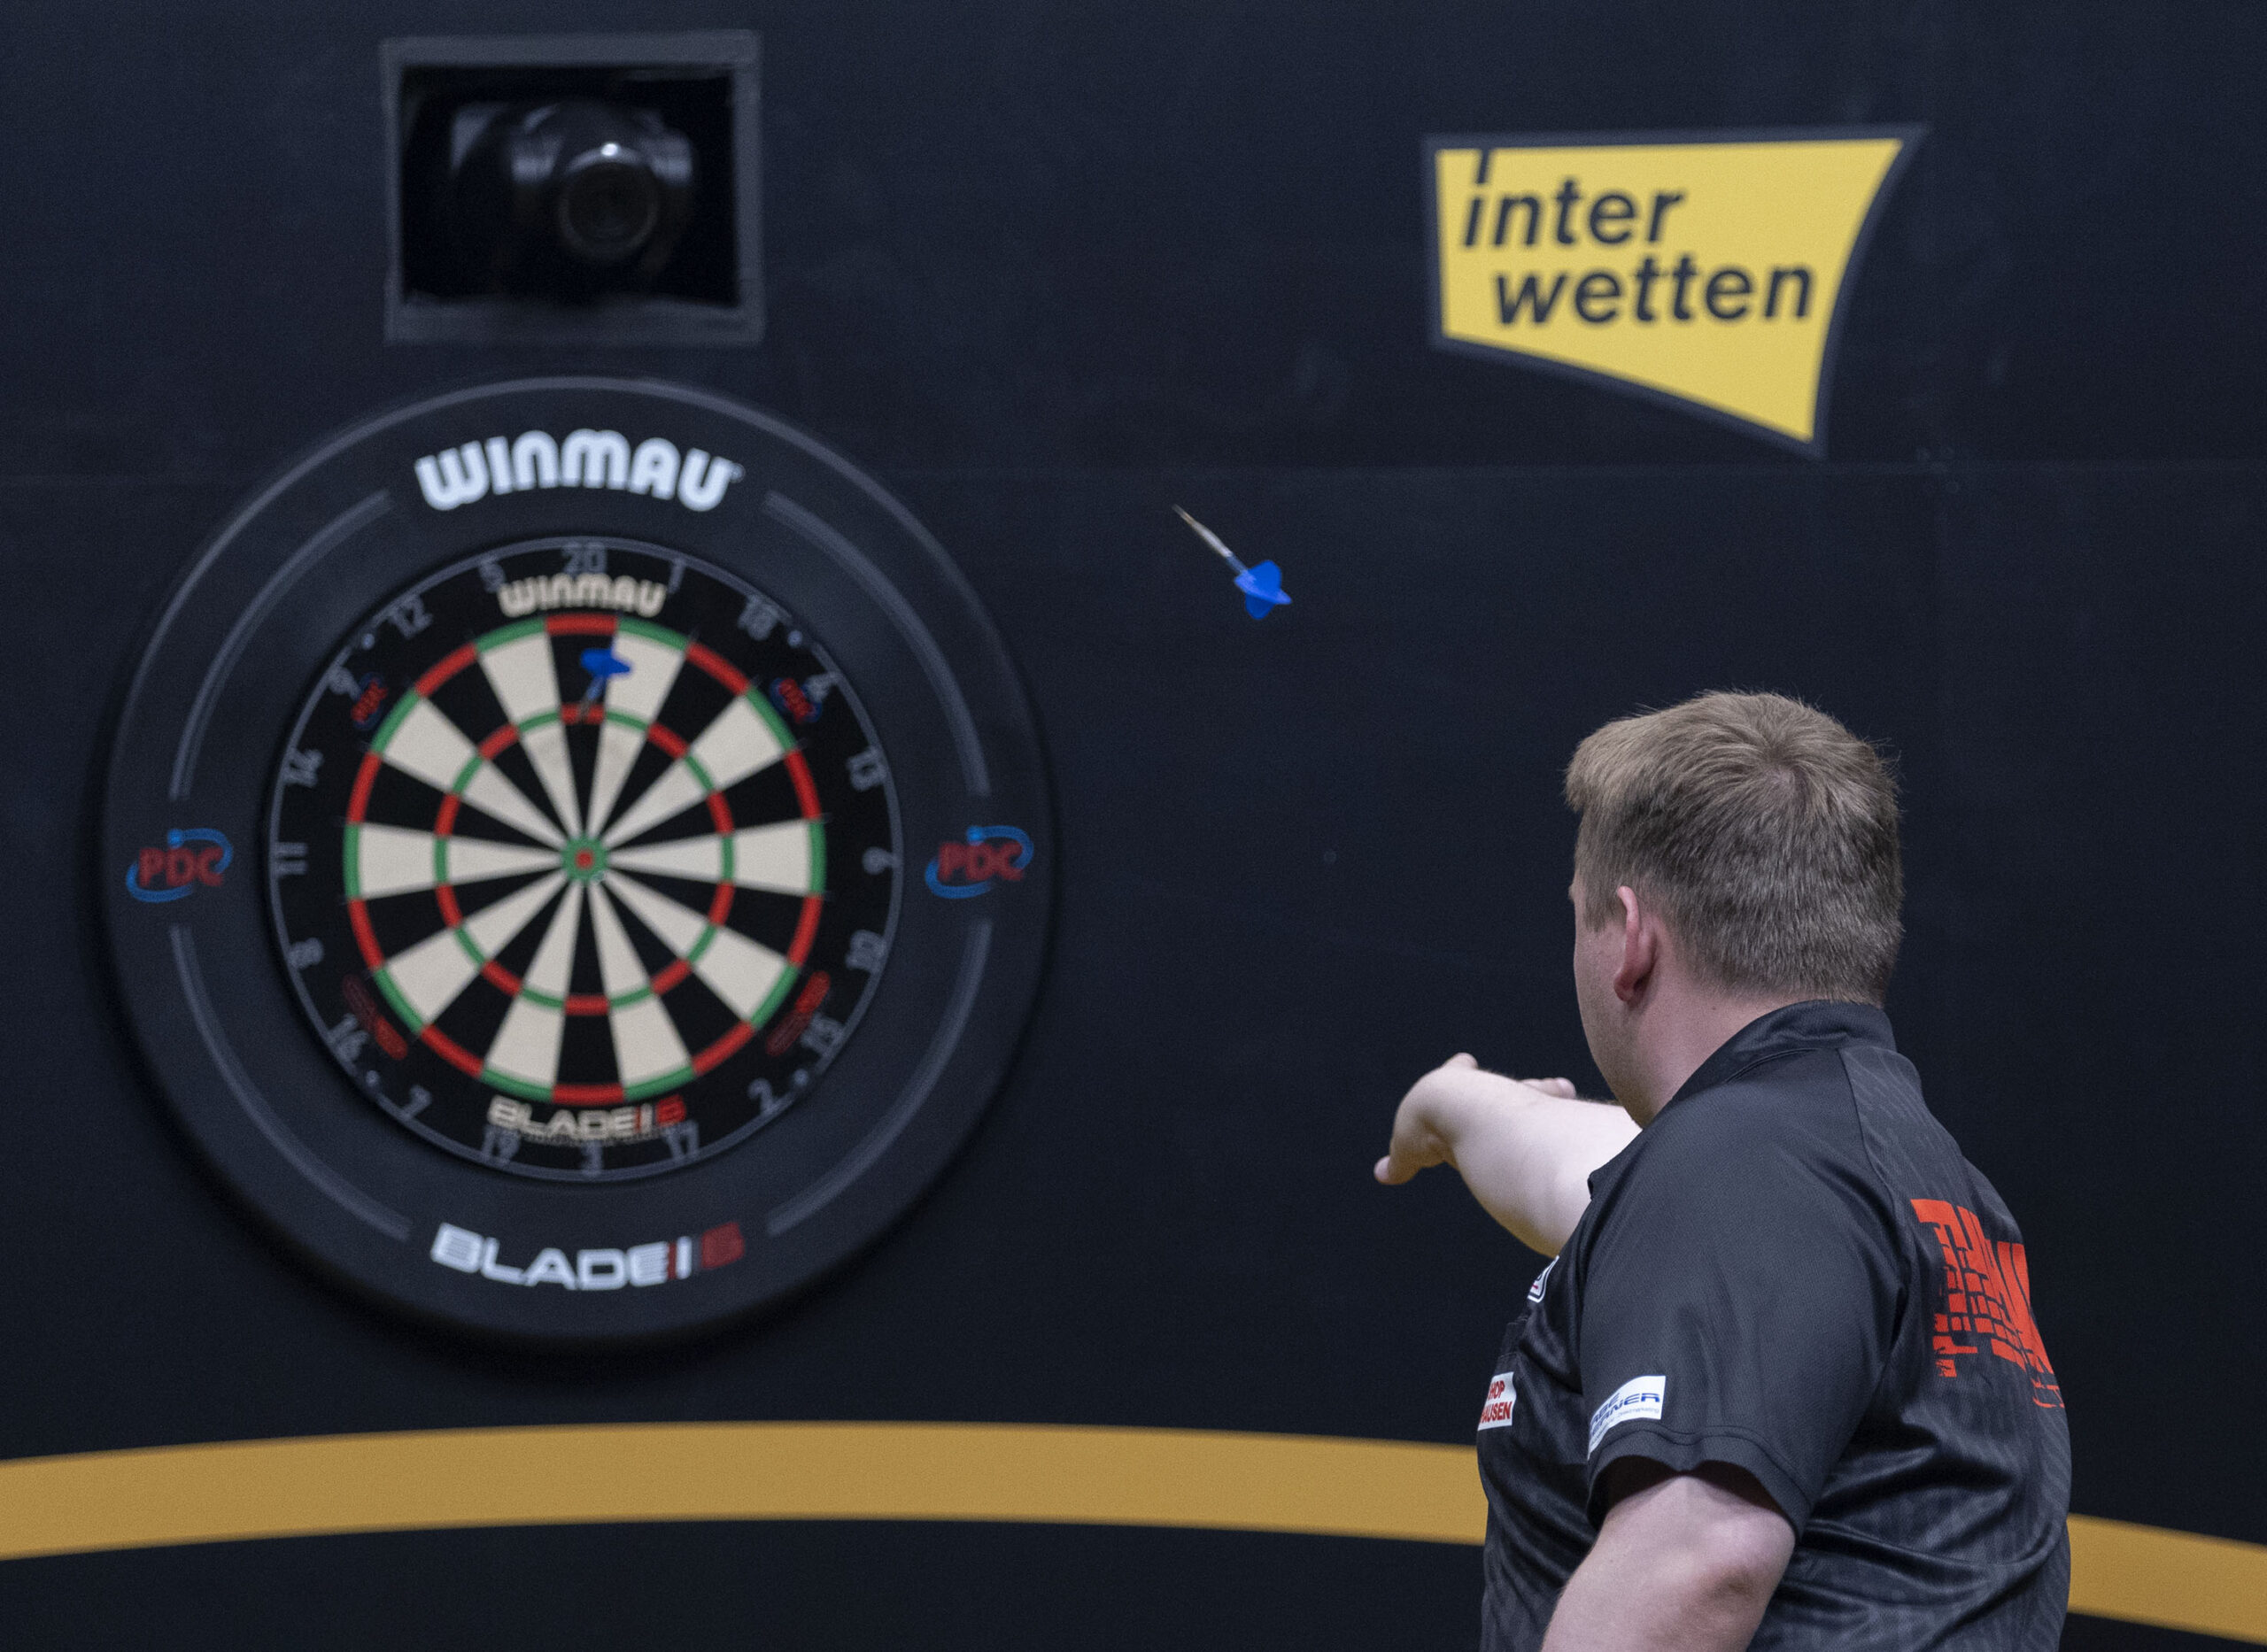 2022 Gambrinus Czech Darts Open draw and schedule And How To Watch